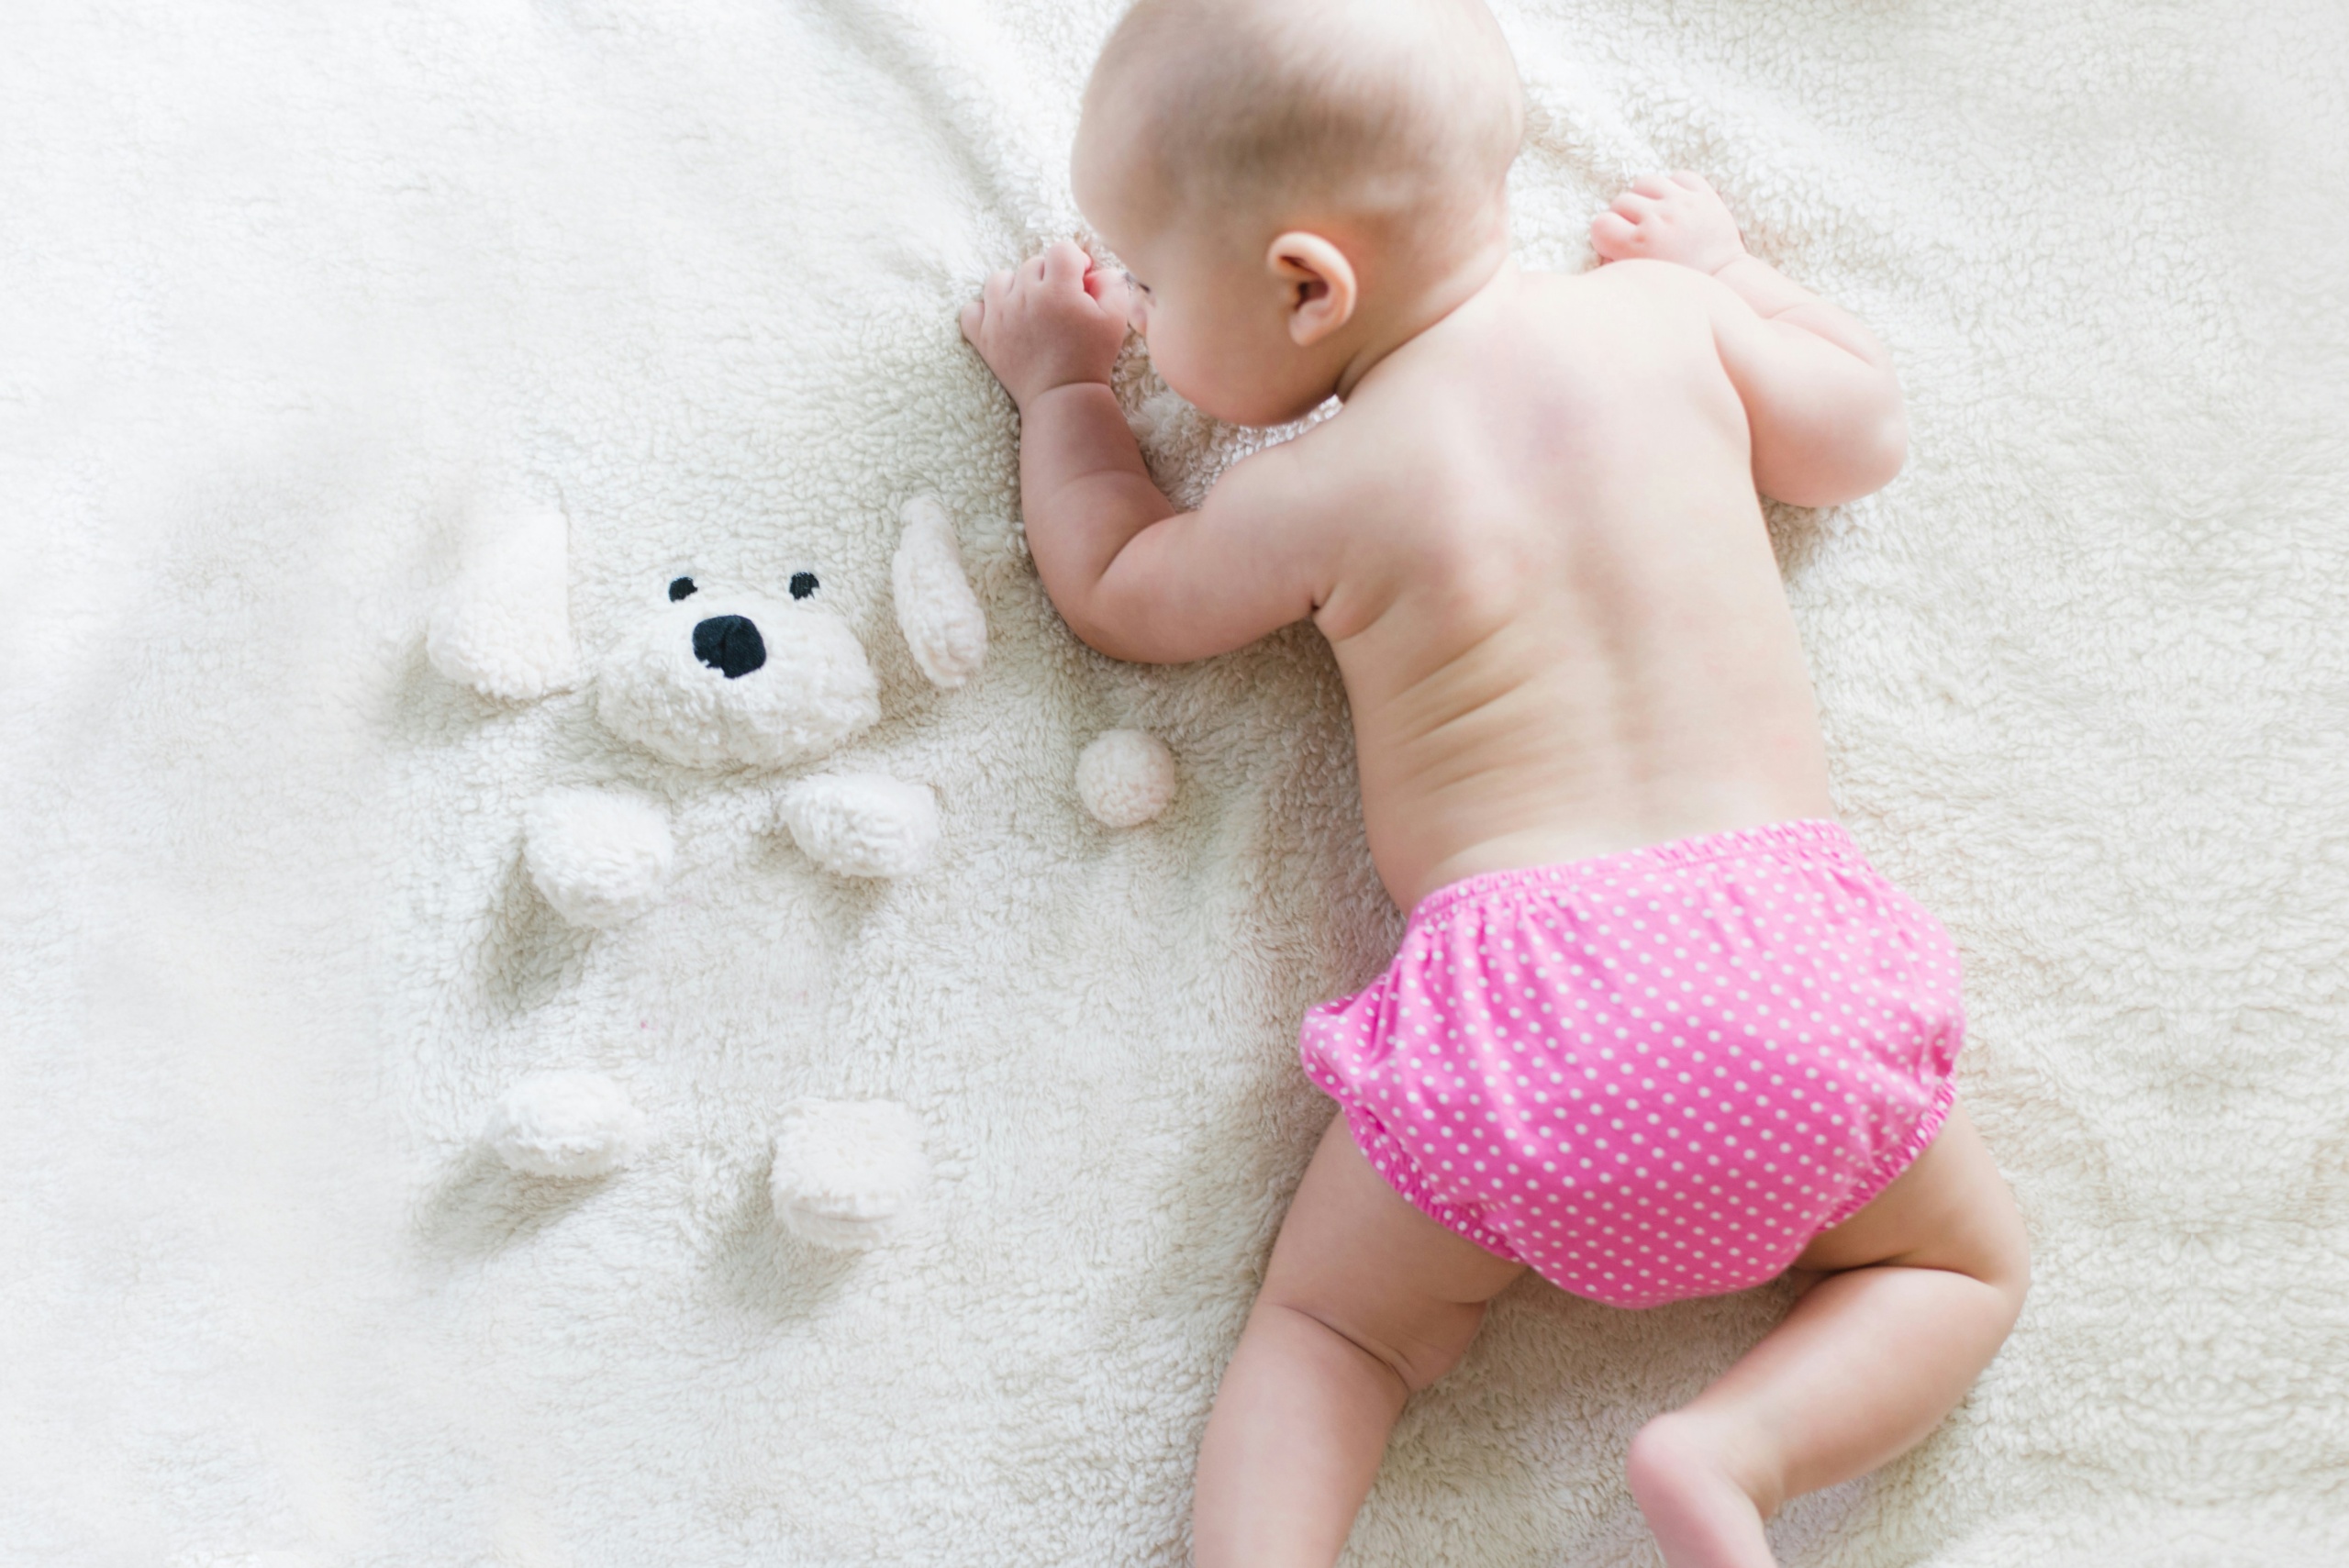 A baby crawling on a soft white blanket.